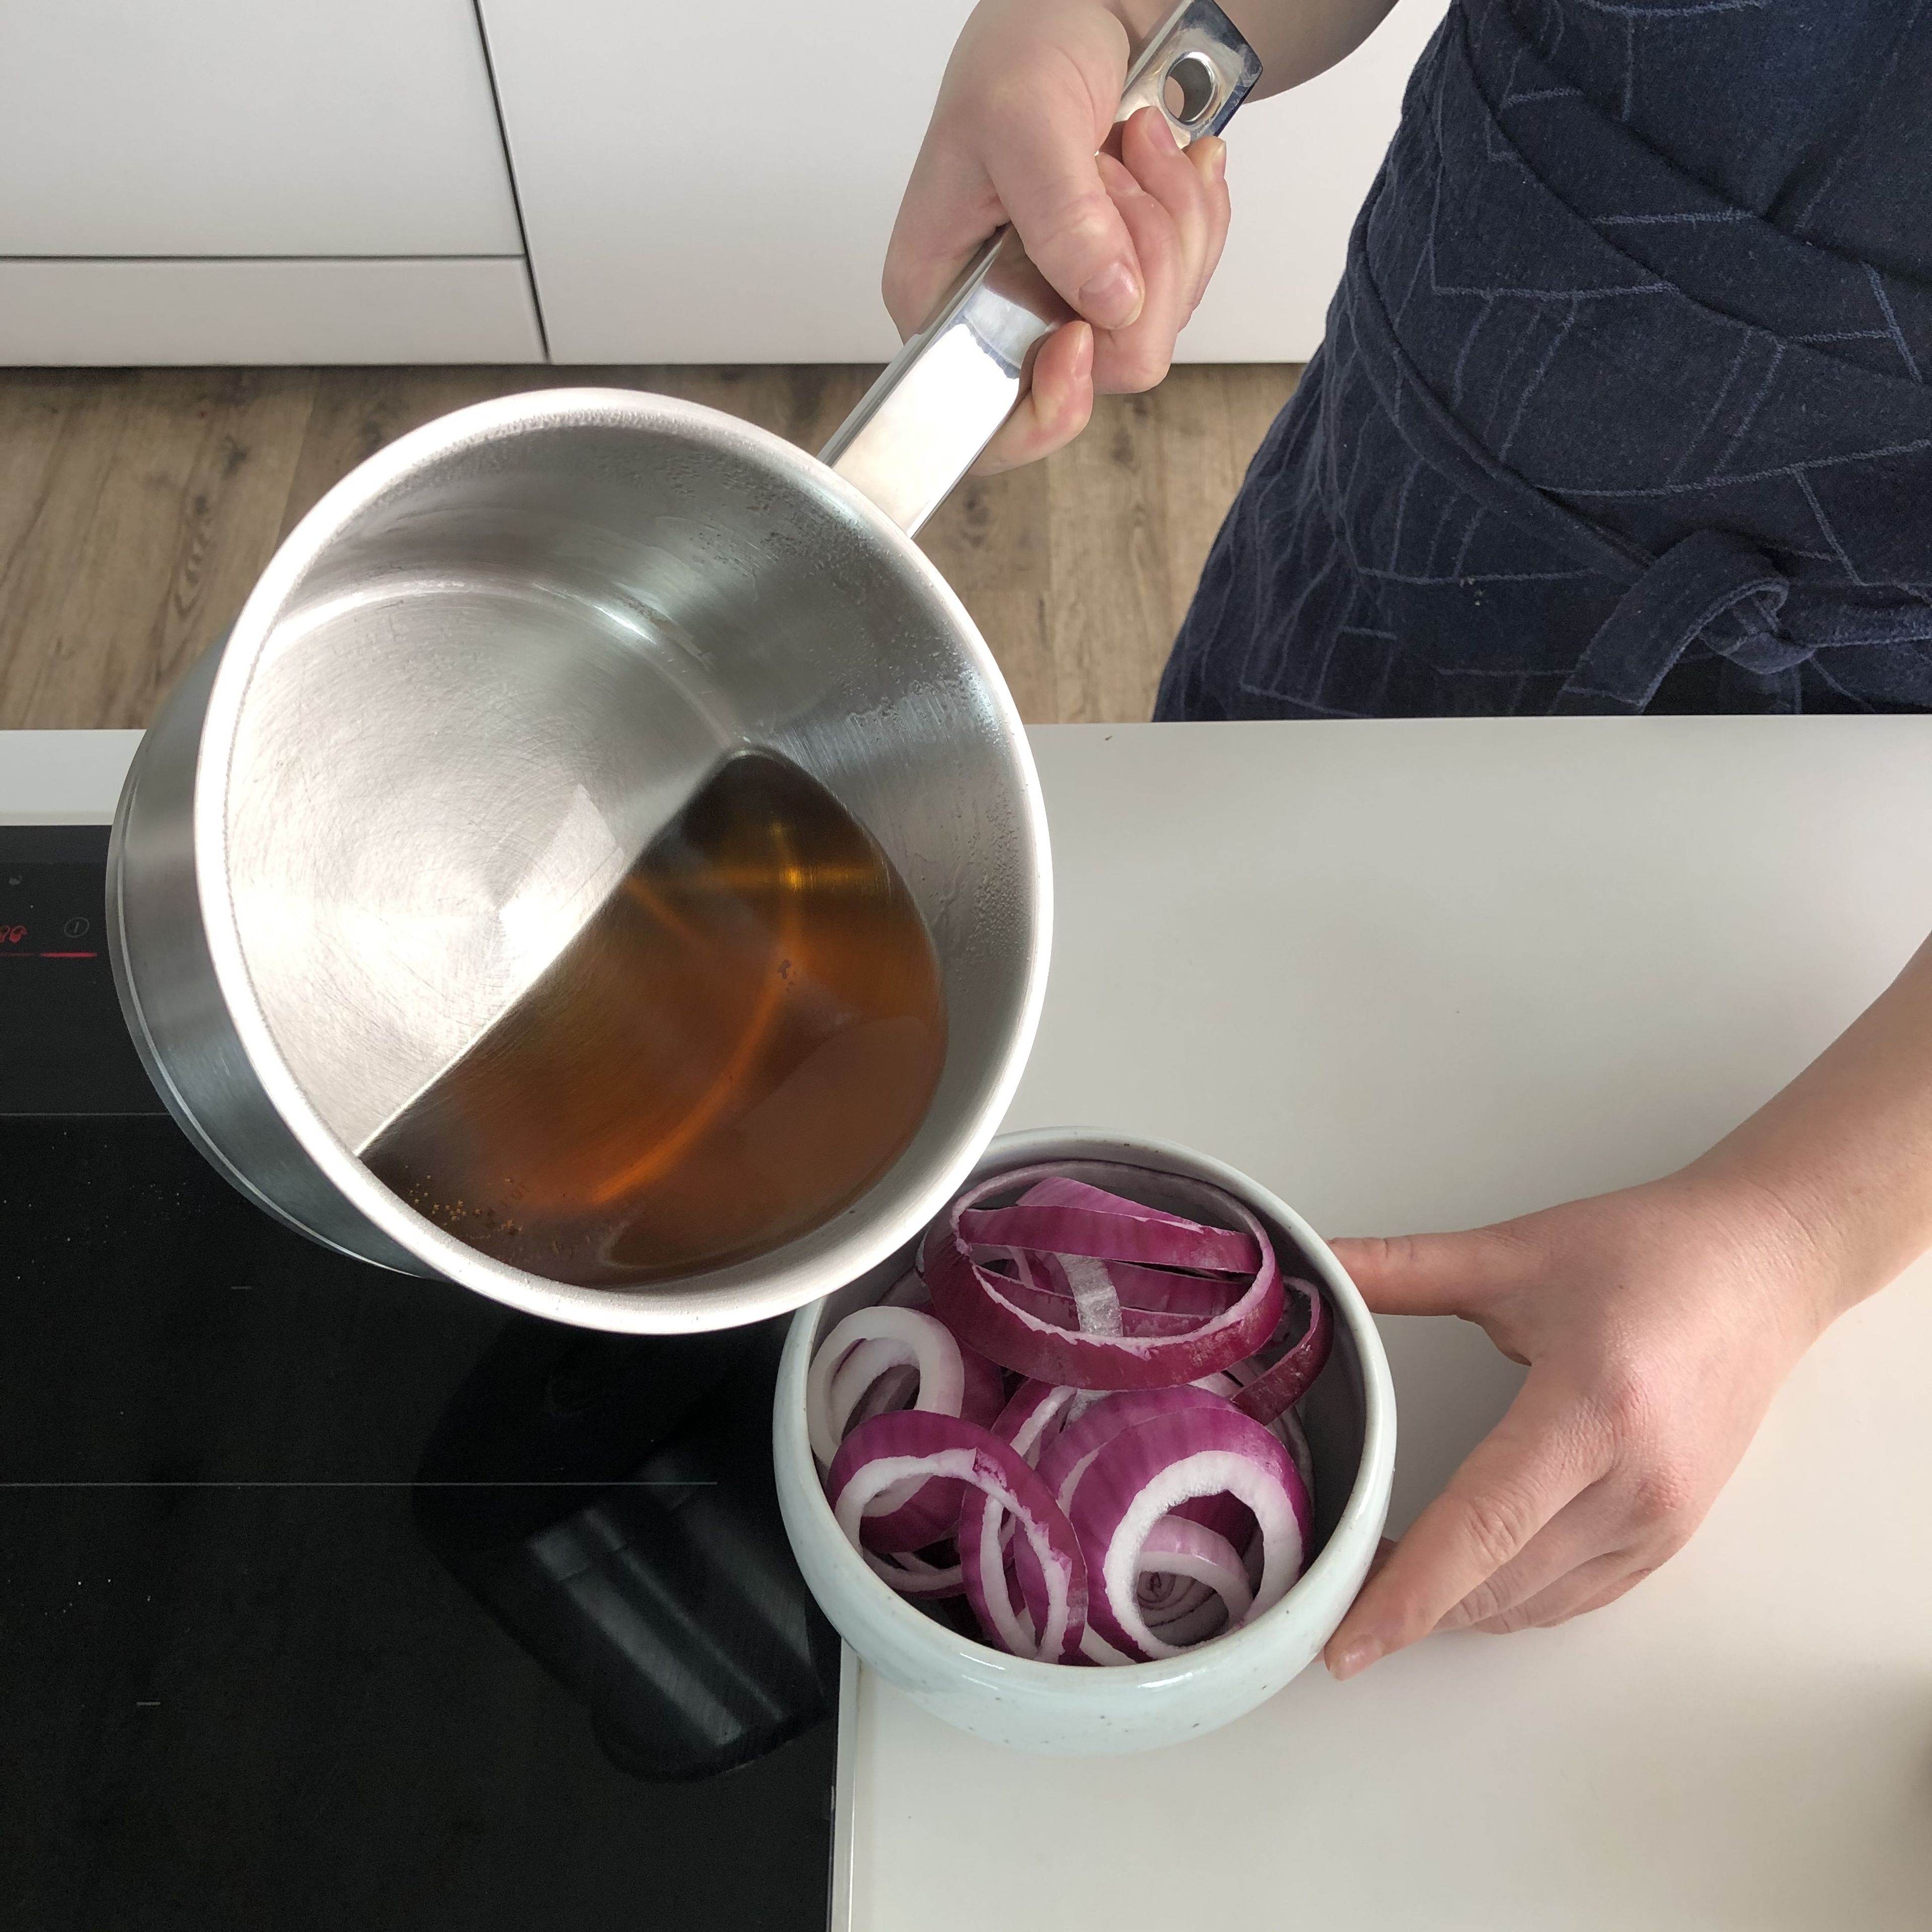 For the quick pickled onions, heat the vinegar with sugar and salt in a small saucepan until the sugar and salt dissolve. Separate the onion rings from each other and pour the hot brine over them.